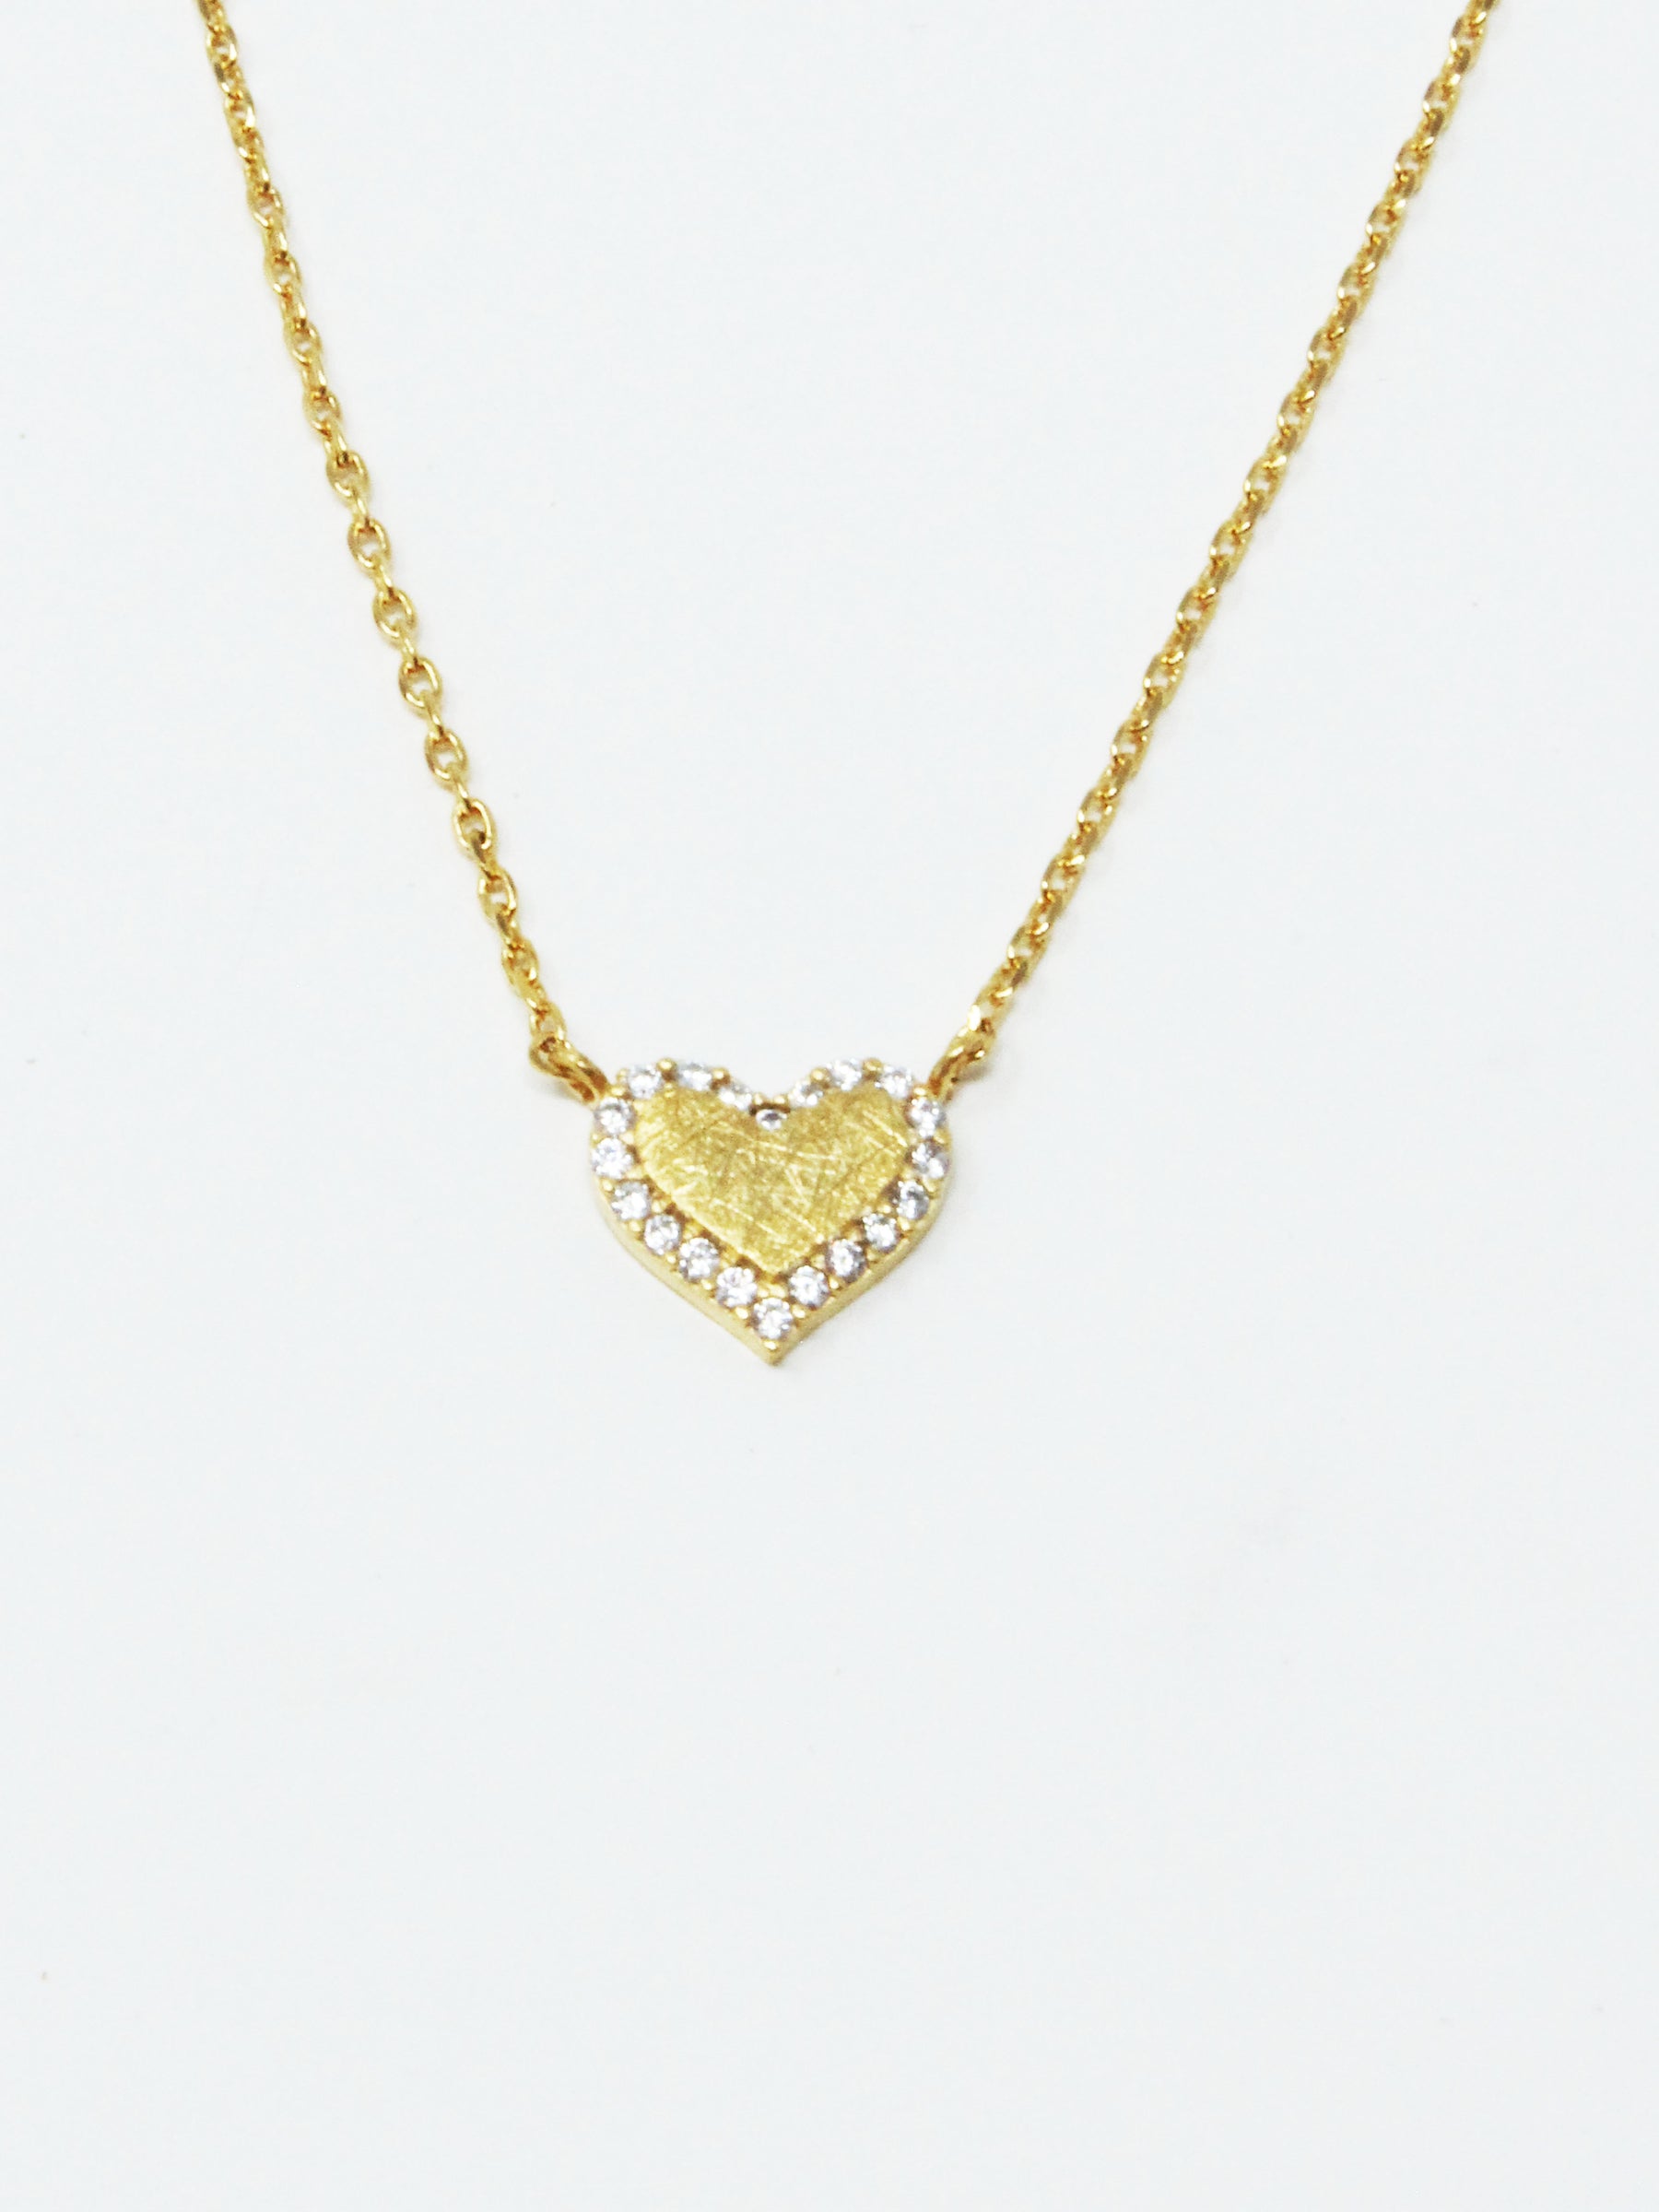 Outlined Heart Necklace